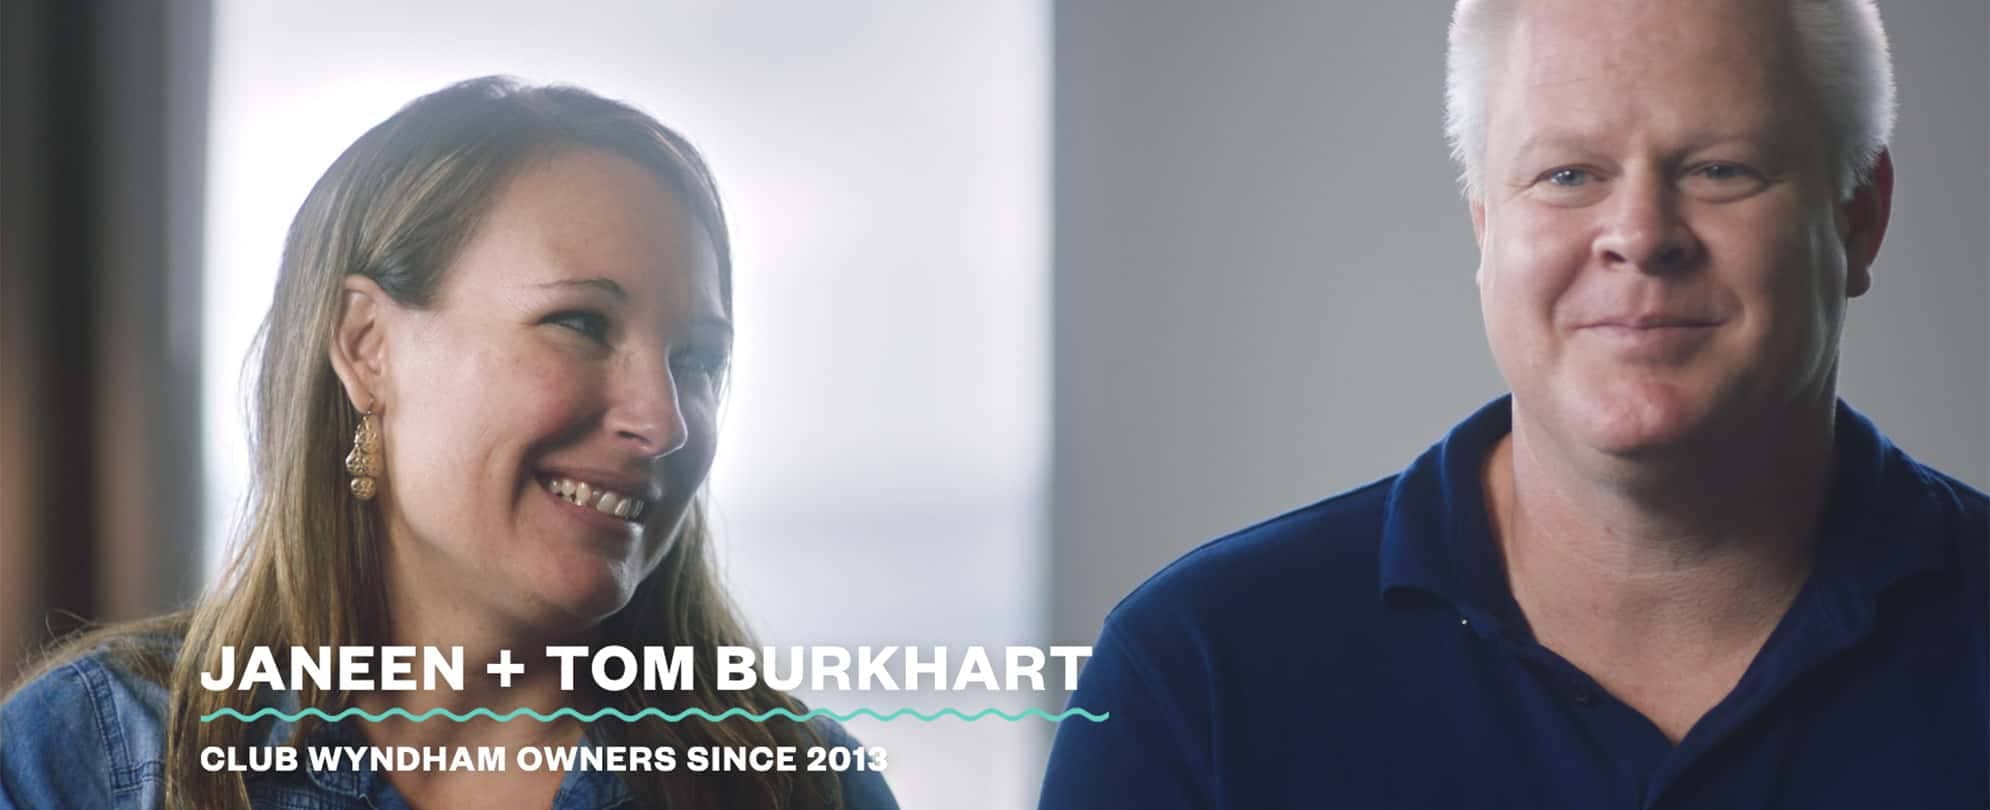 Club Wyndham Owners since 2013 Janeen and Tom Burkhart 